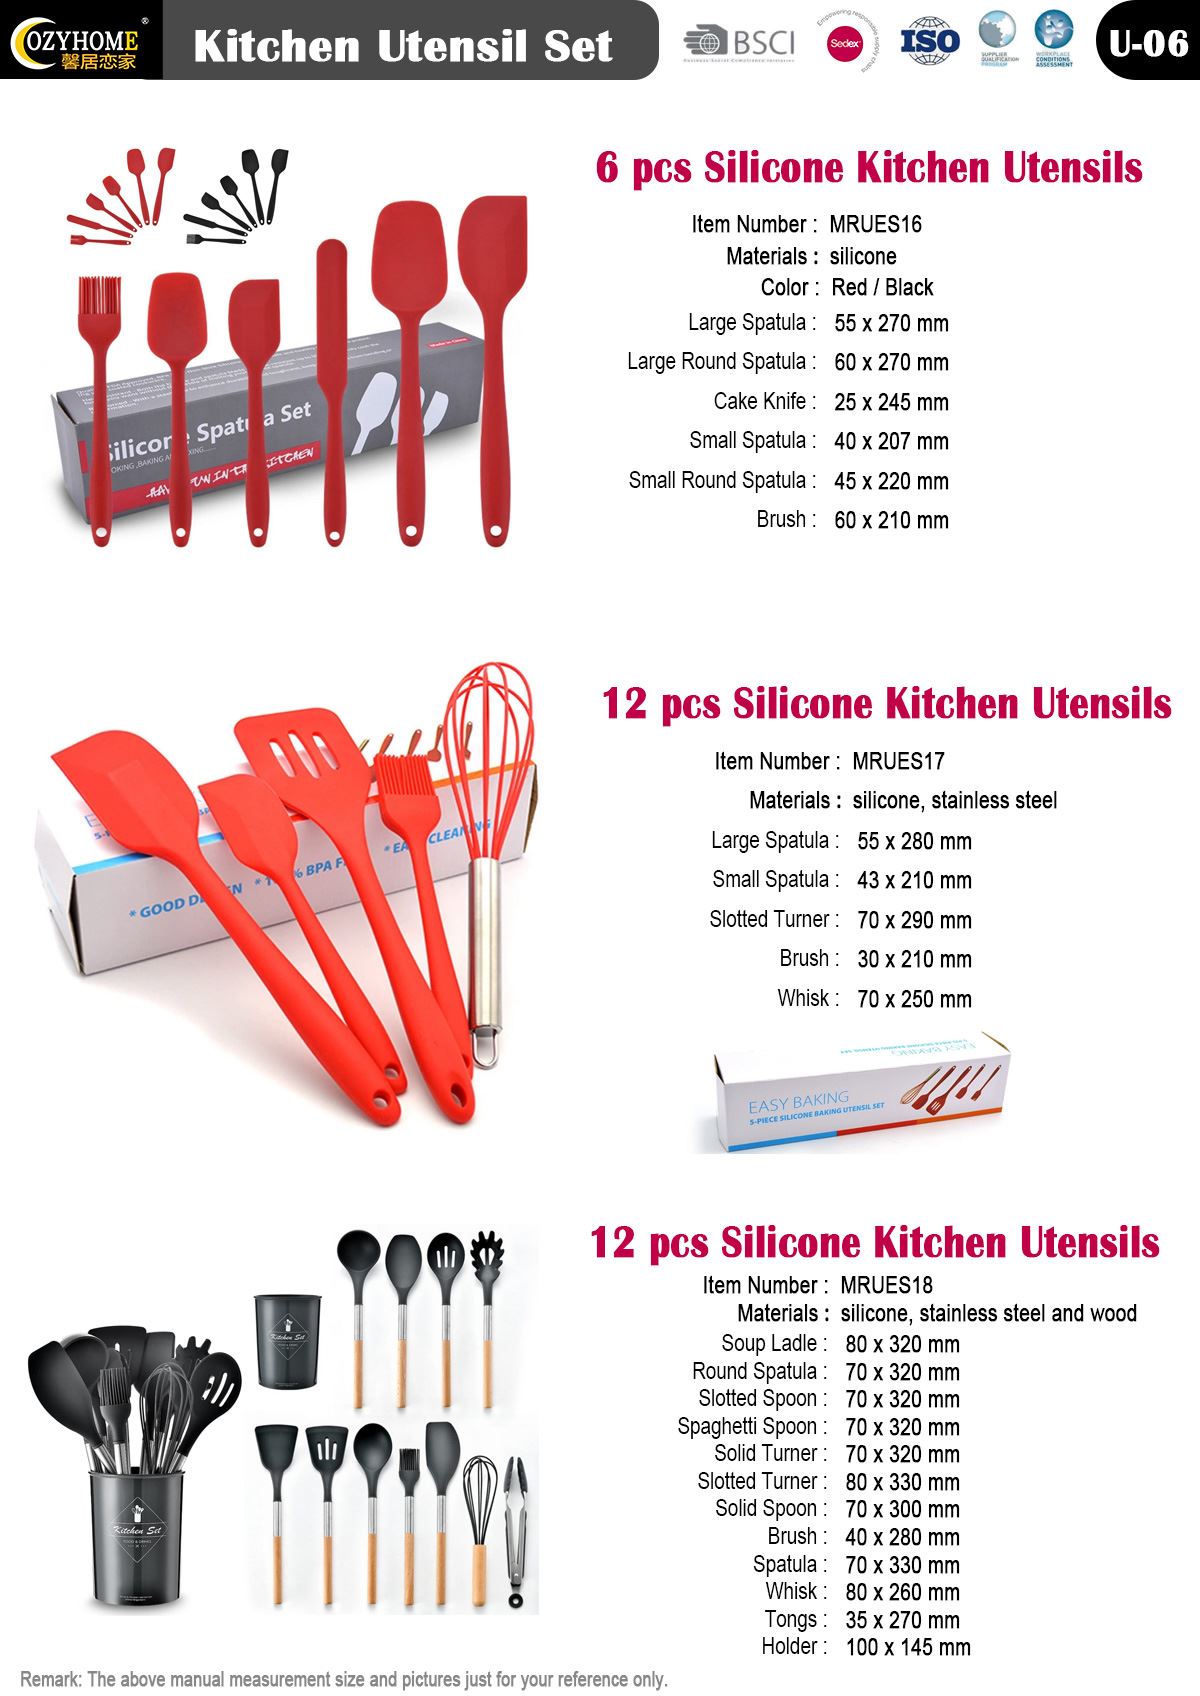 Silicone Kitchen Utensils 2019 Pages: 06